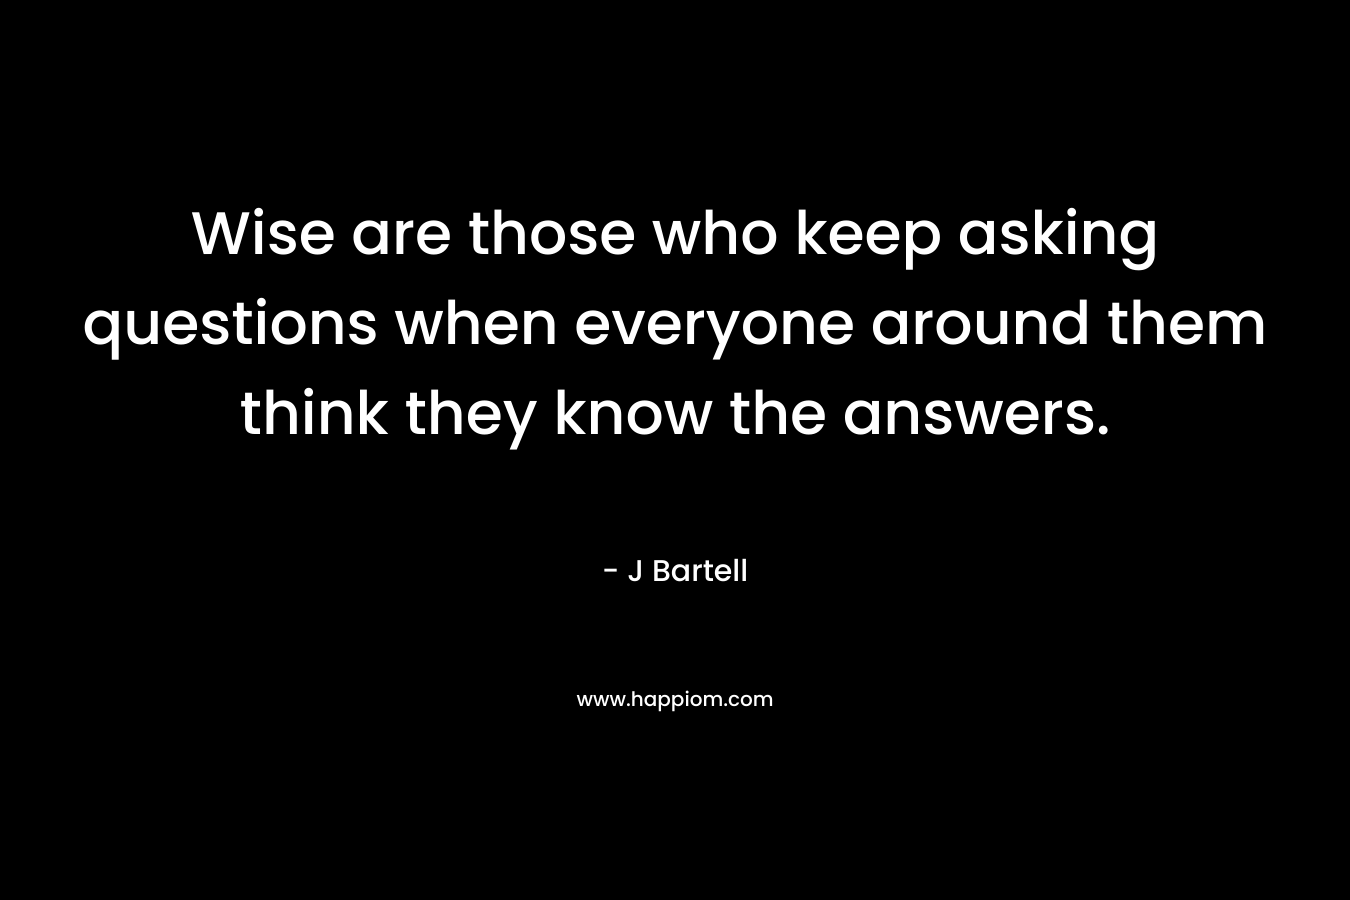 Wise are those who keep asking questions when everyone around them think they know the answers. – J Bartell